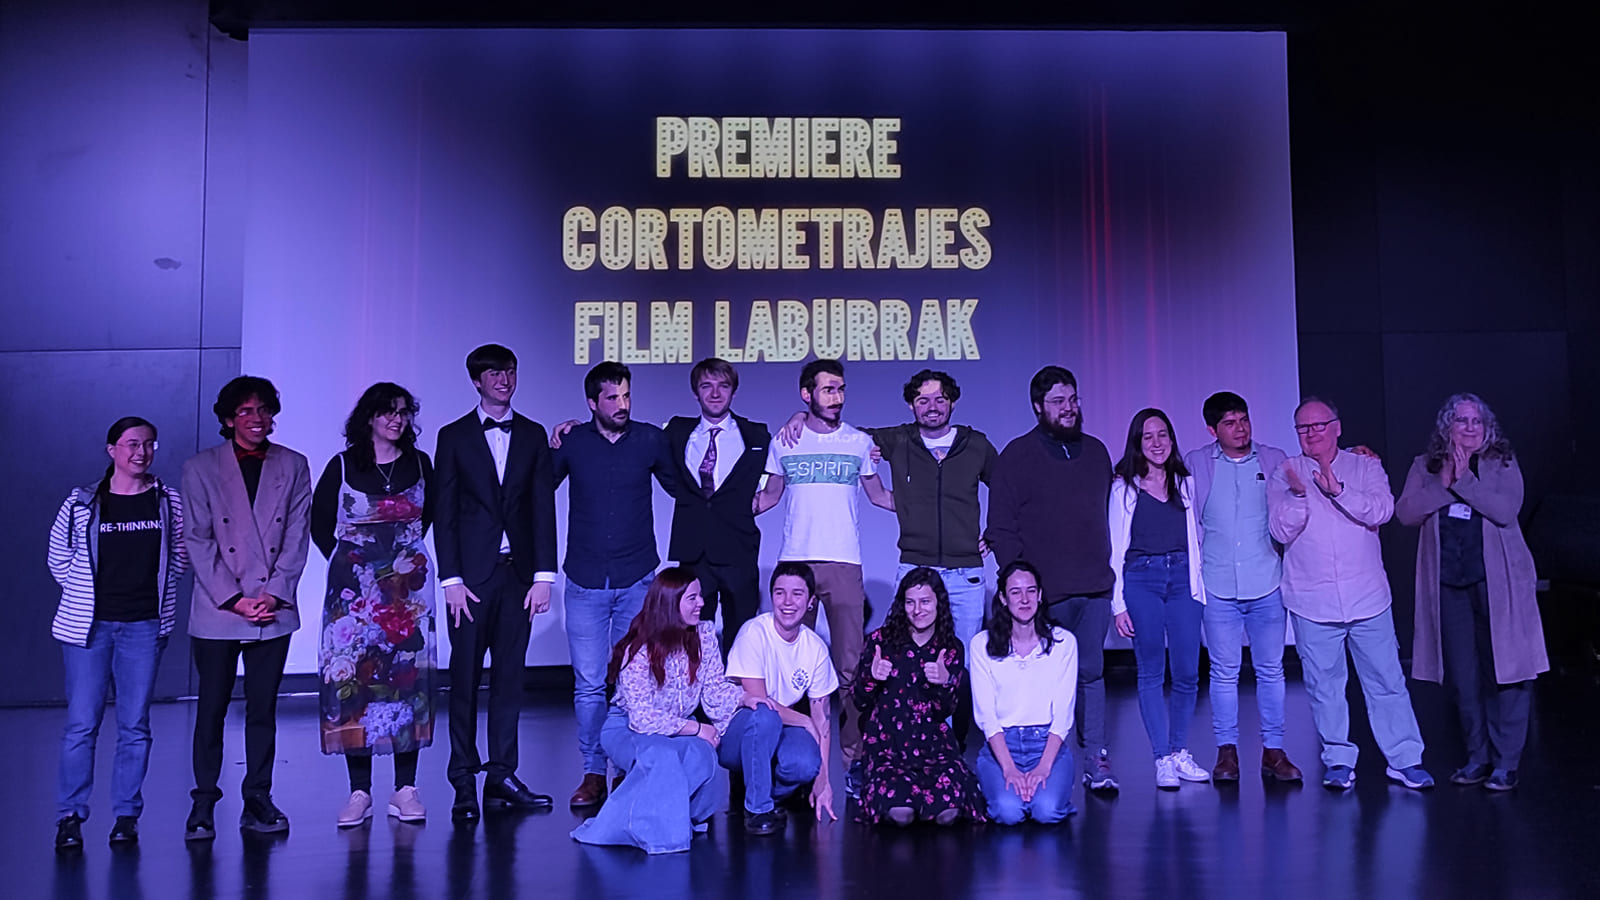  A group of DigiPen and Musikene students standing and posing for a photograph in front of a projection screen showcasing a film premiere.